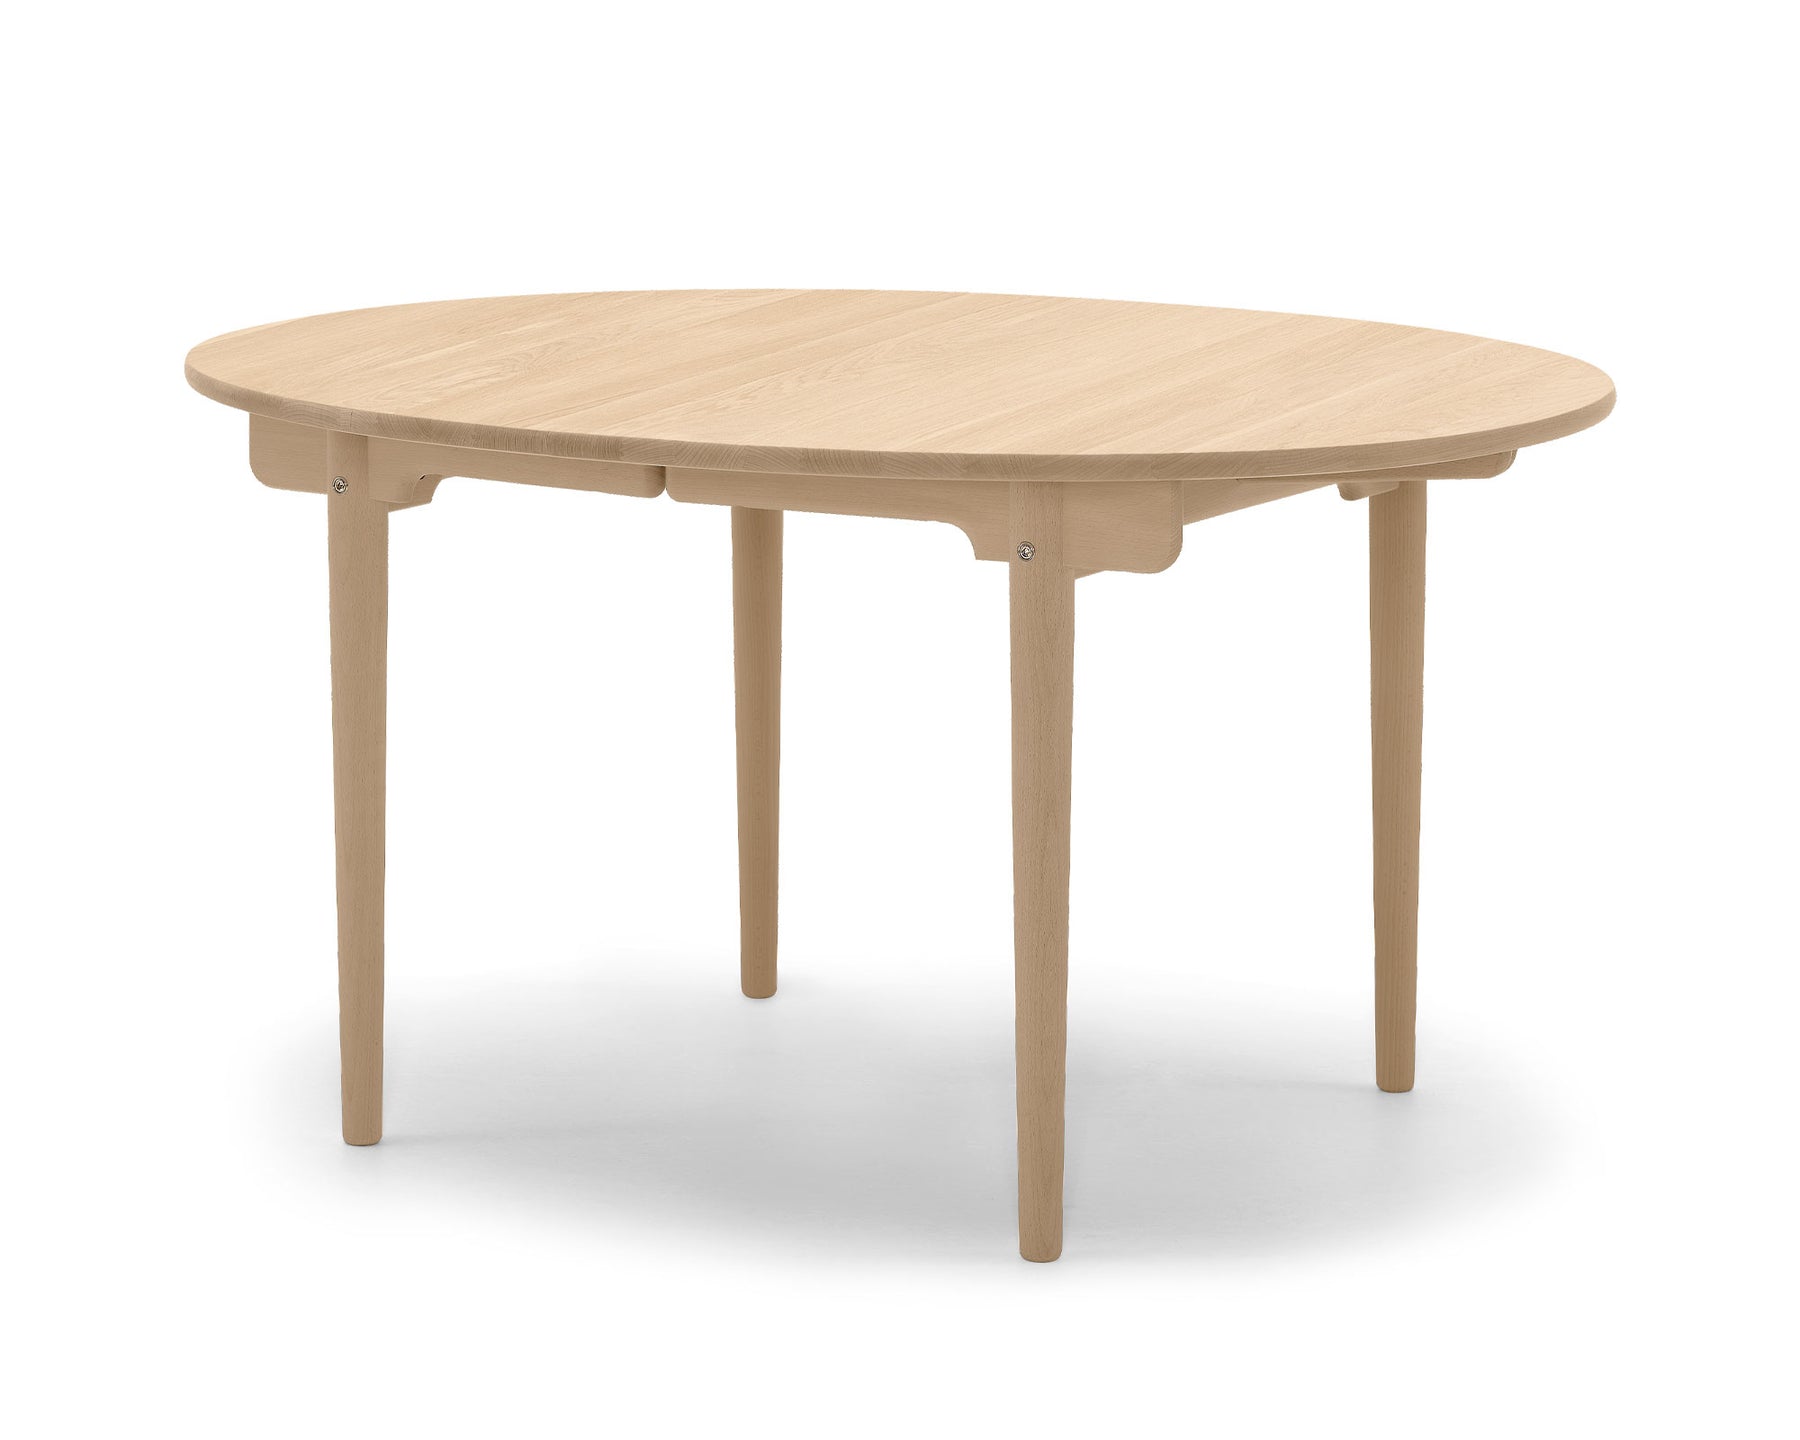 Small Oval Dining Table | DSHOP